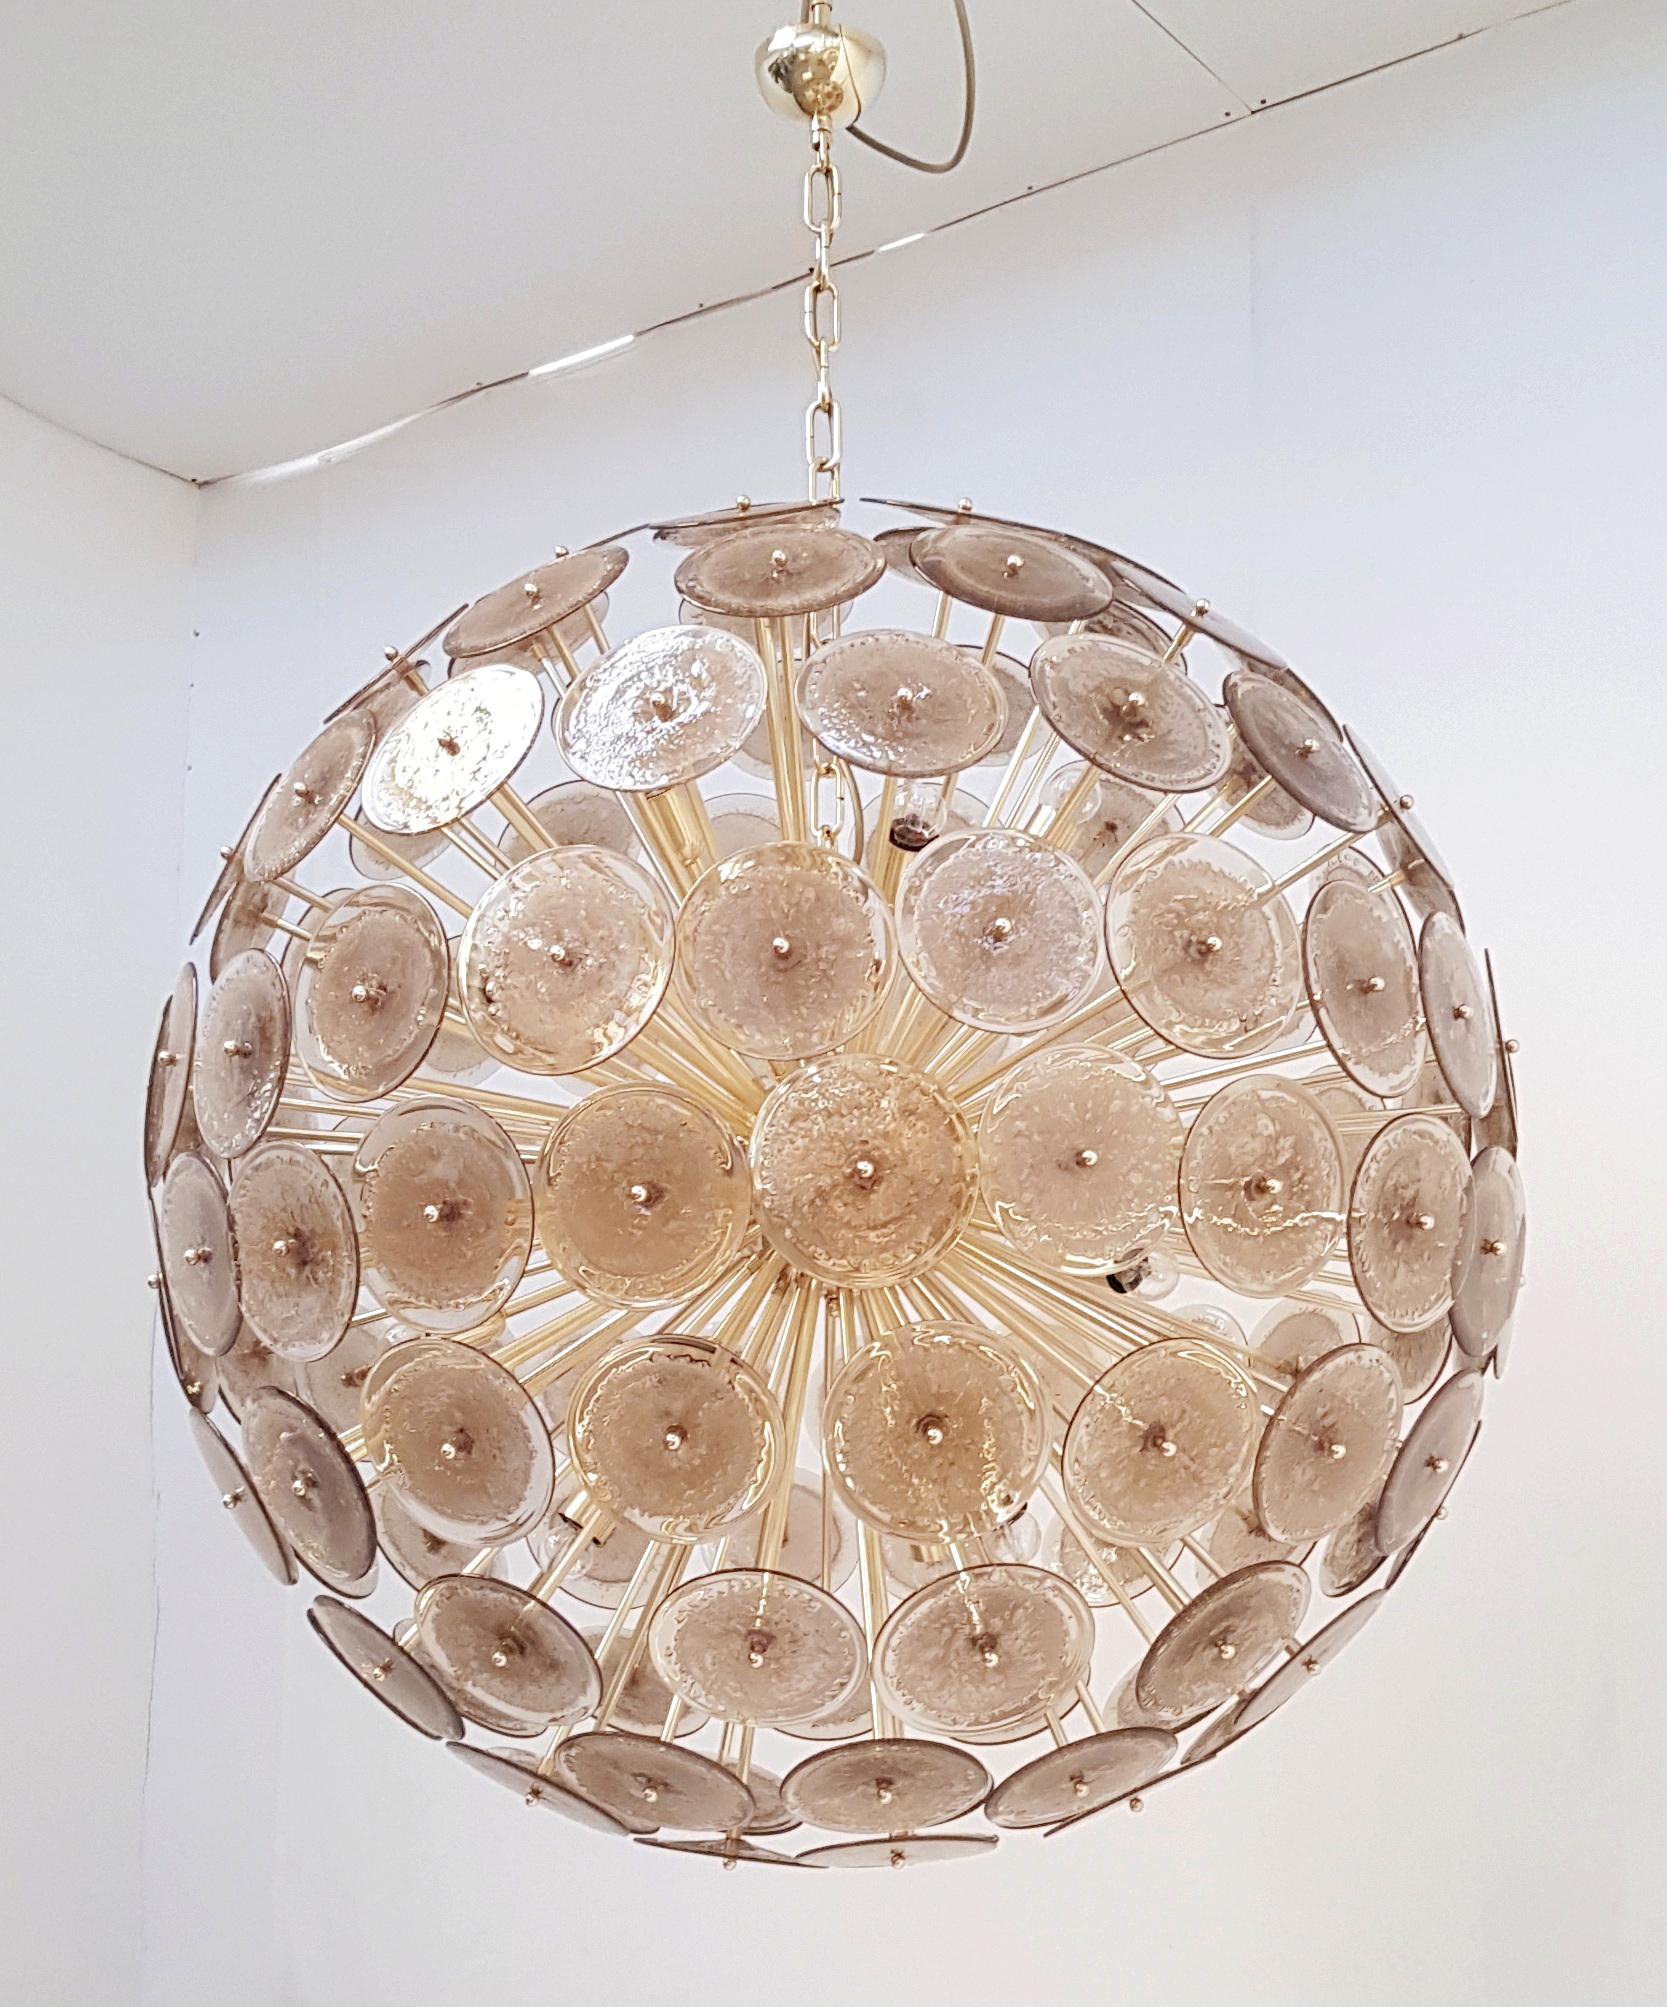 Italian round sputnik chandelier with smoky brown Murano glass discs hand blown with bubbles using Pulegoso technique, mounted on solid Brass frame in polished unlaquered finish which will develop patina, by Fabio Ltd / Made in Italy
16 lights / E26